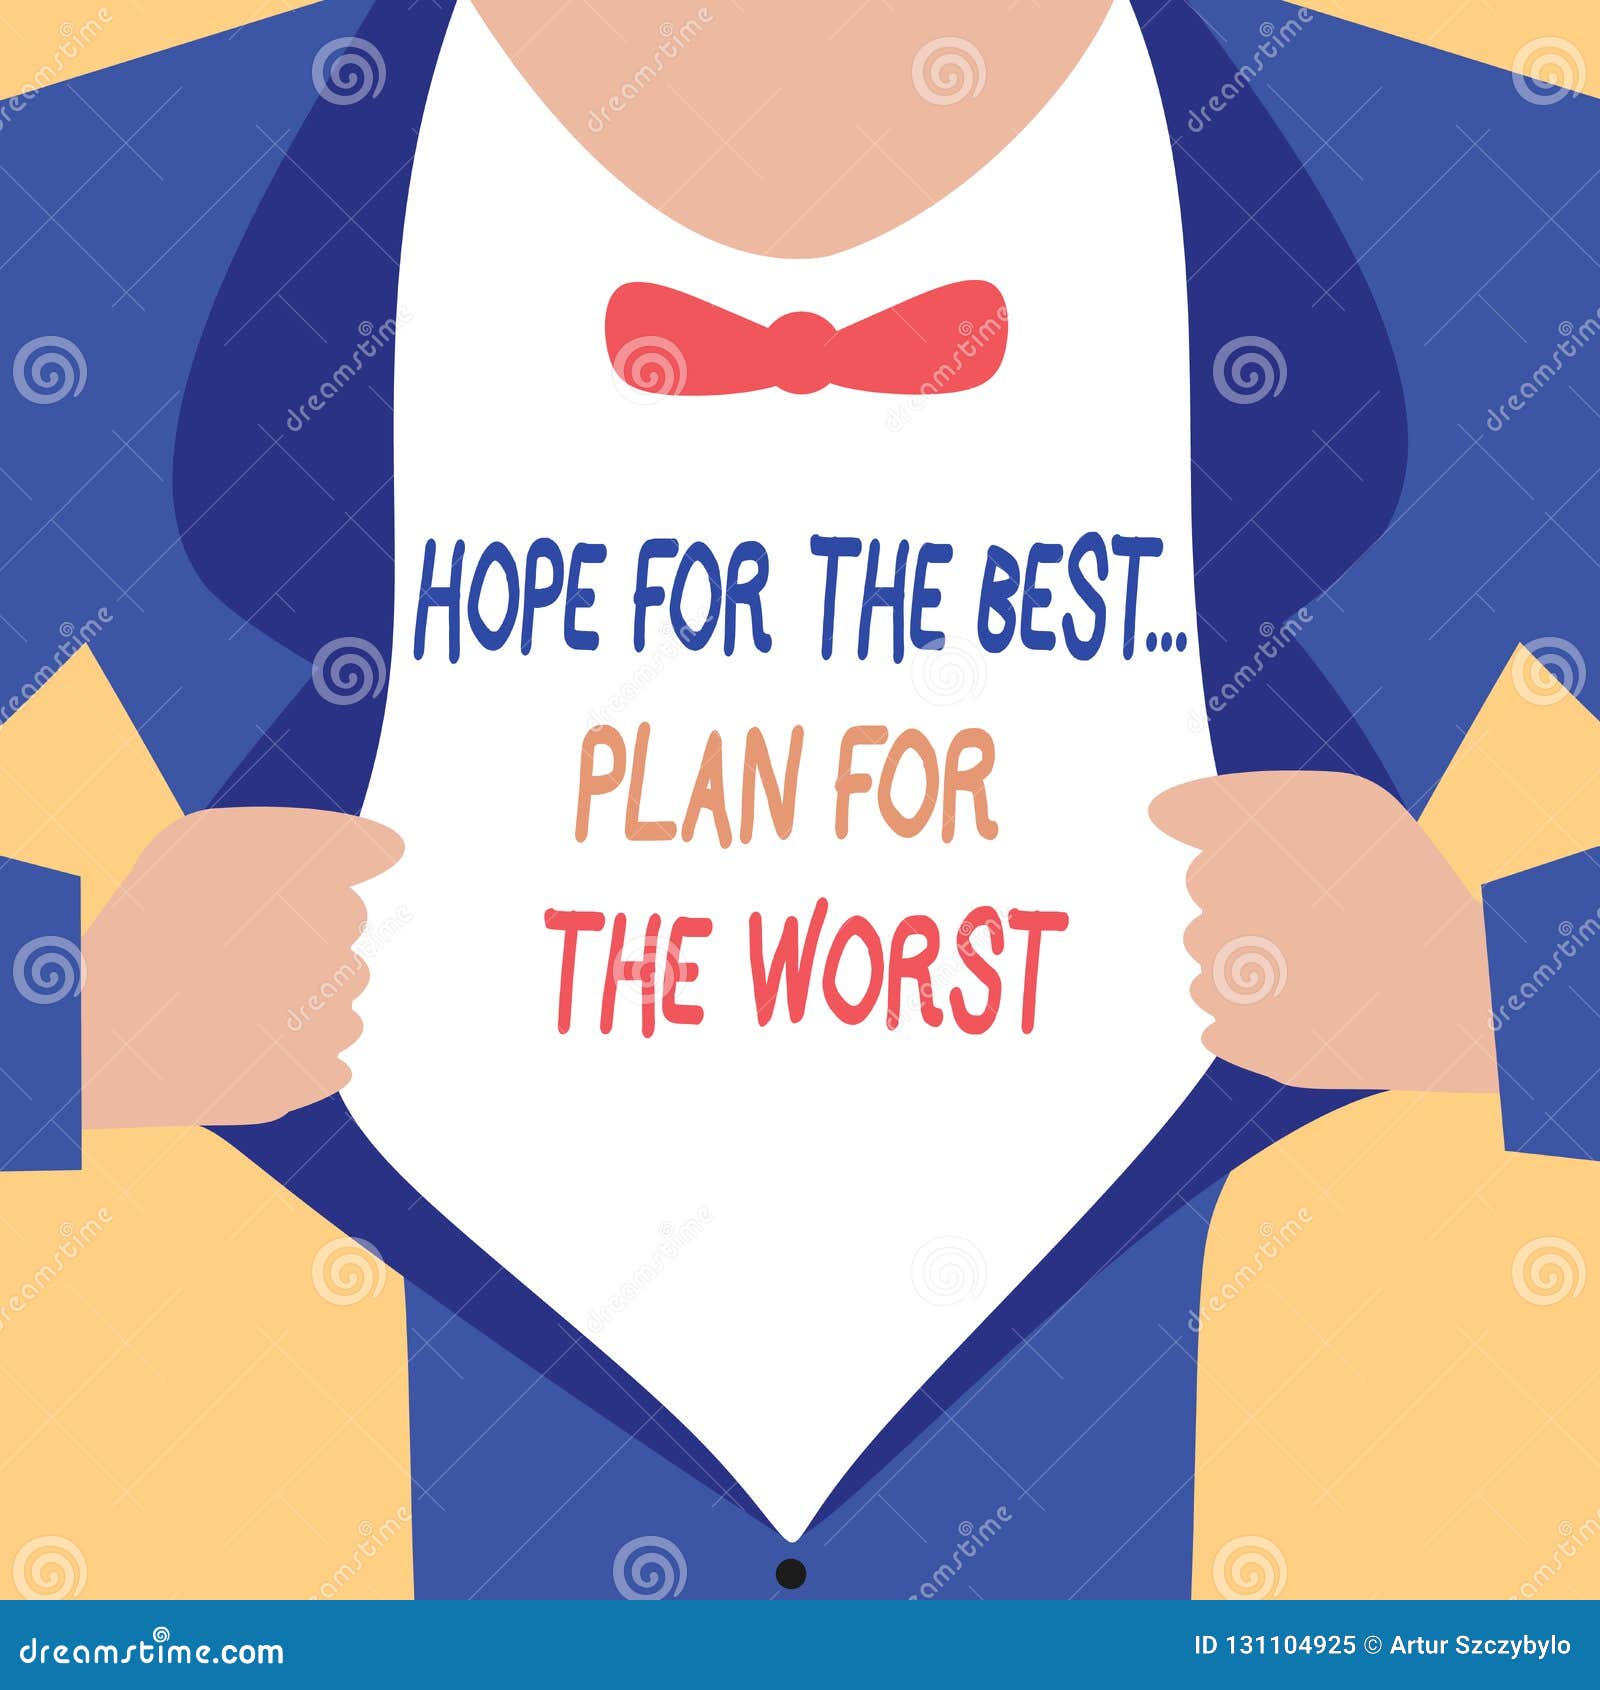 Handwriting Text Writing Hope for the BestPlan for the Worst